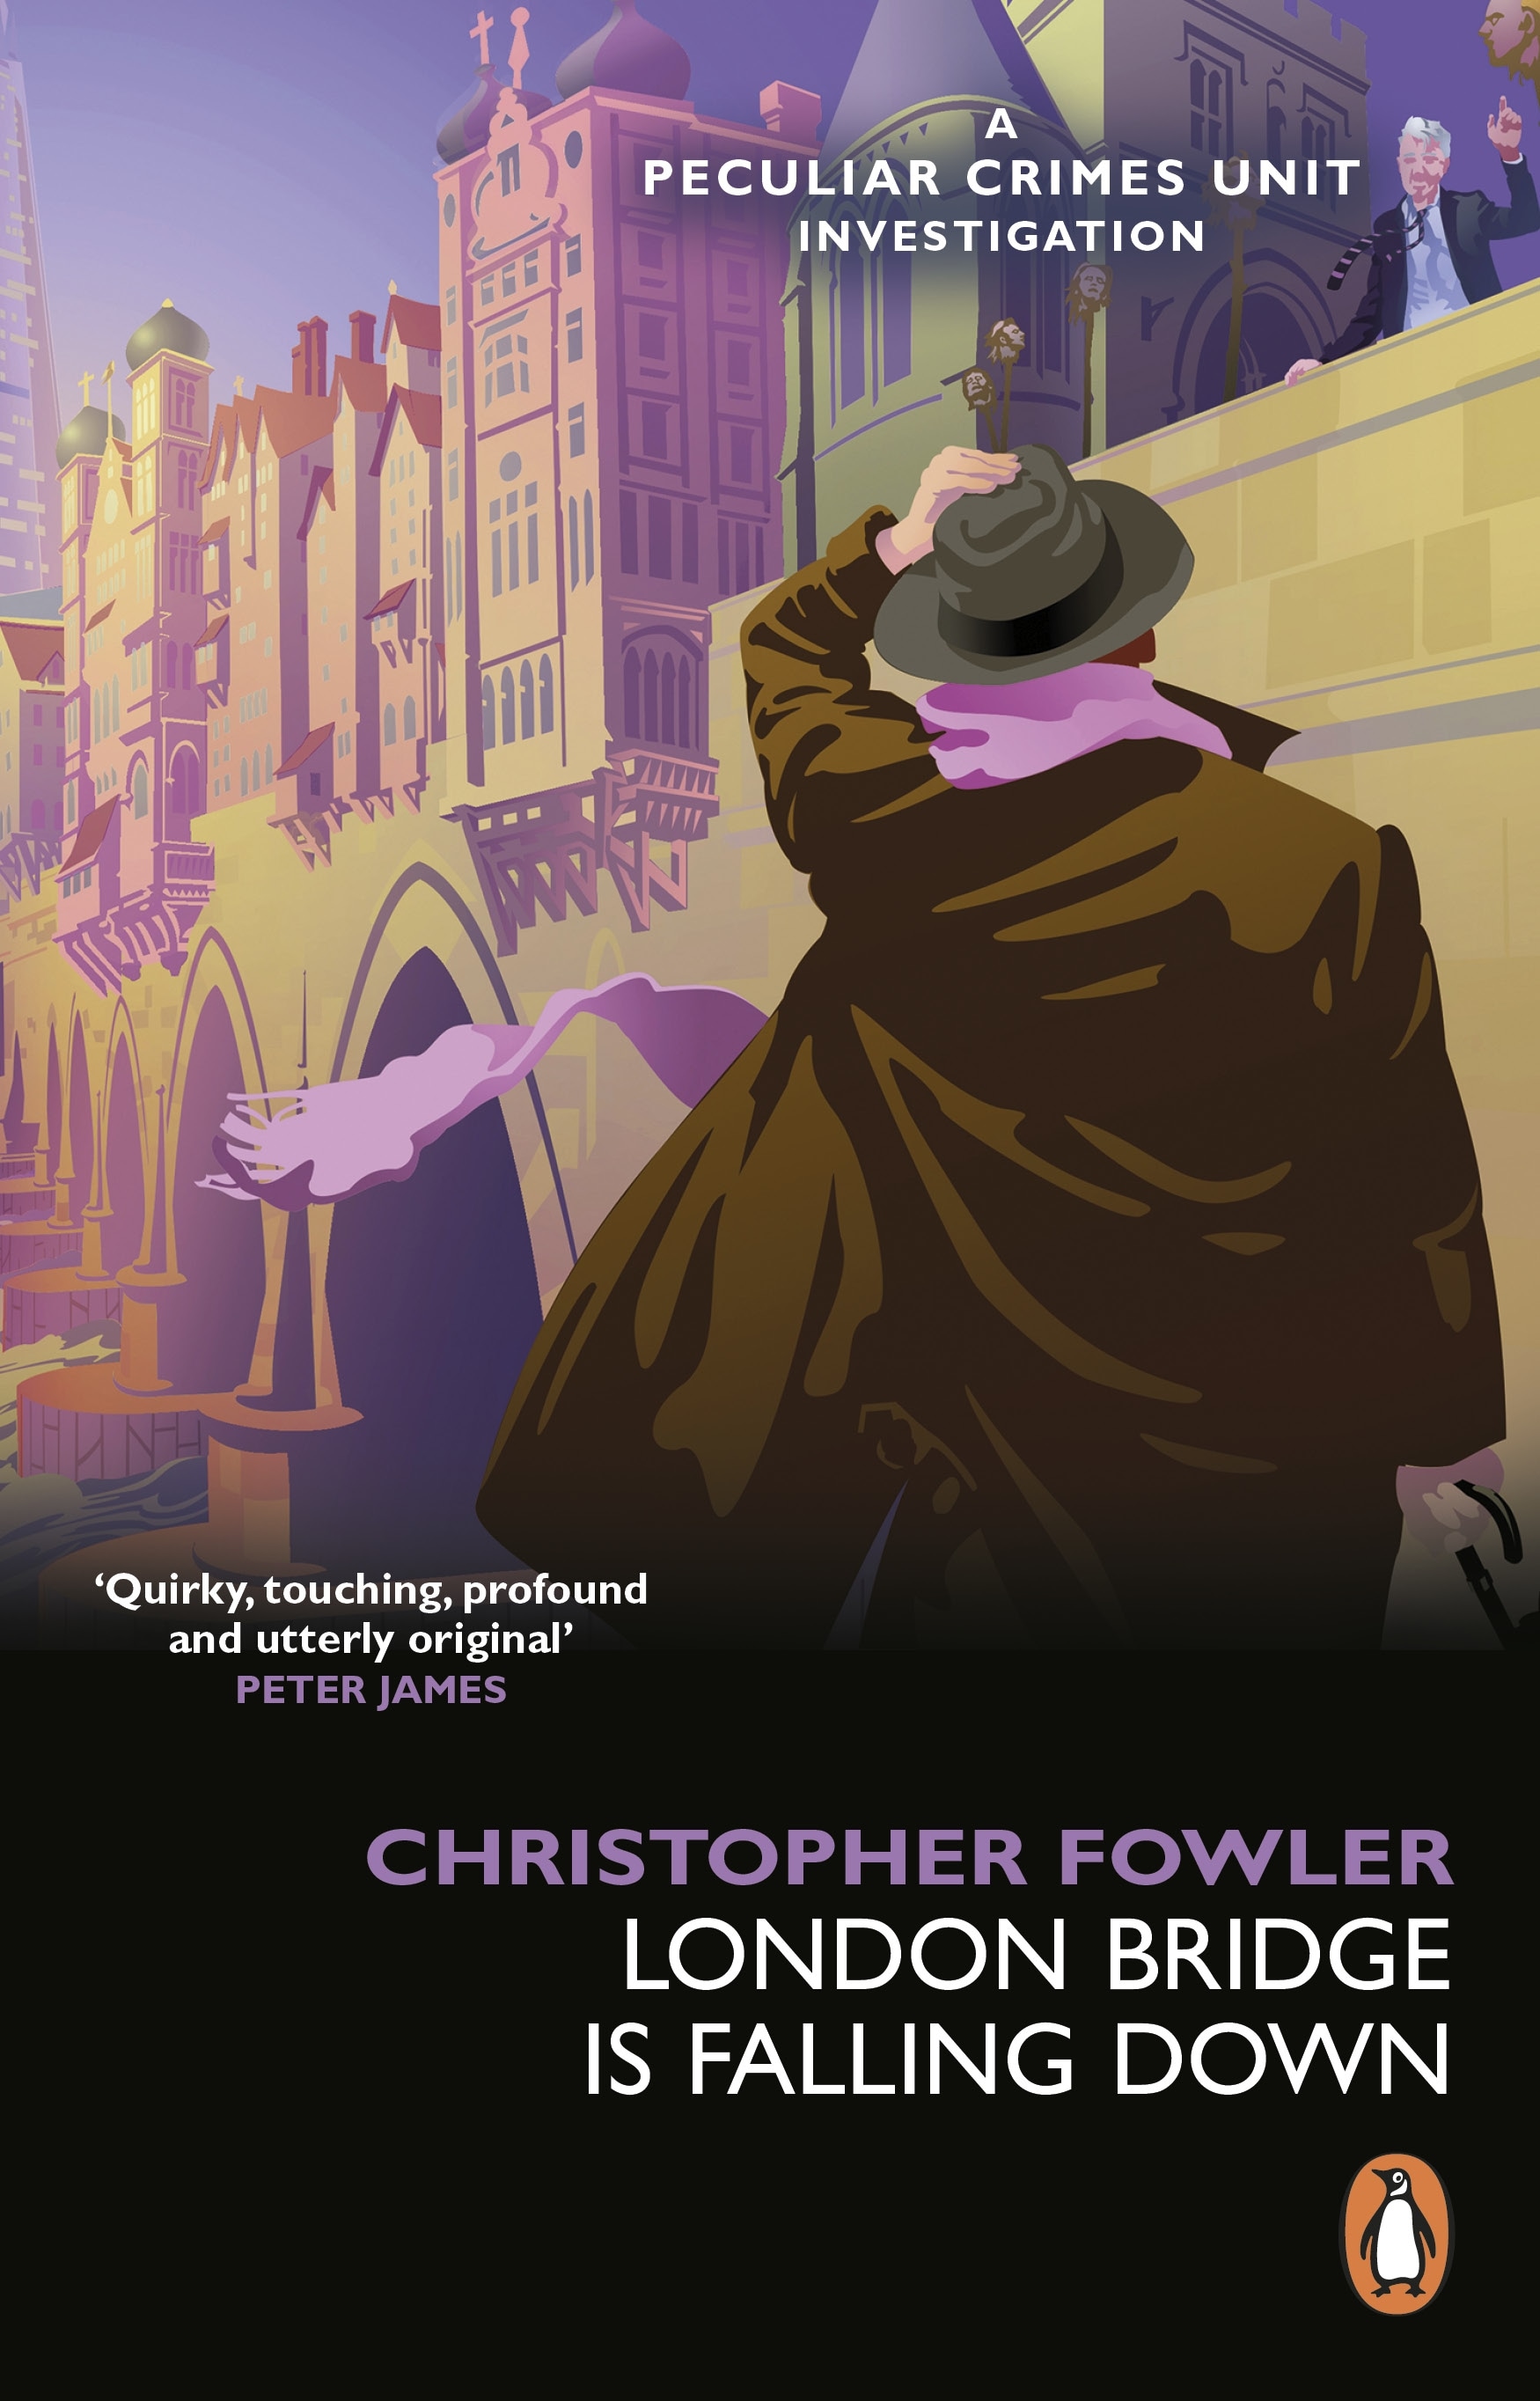 Book “Bryant & May - London Bridge is Falling Down” by Christopher Fowler — March 24, 2022